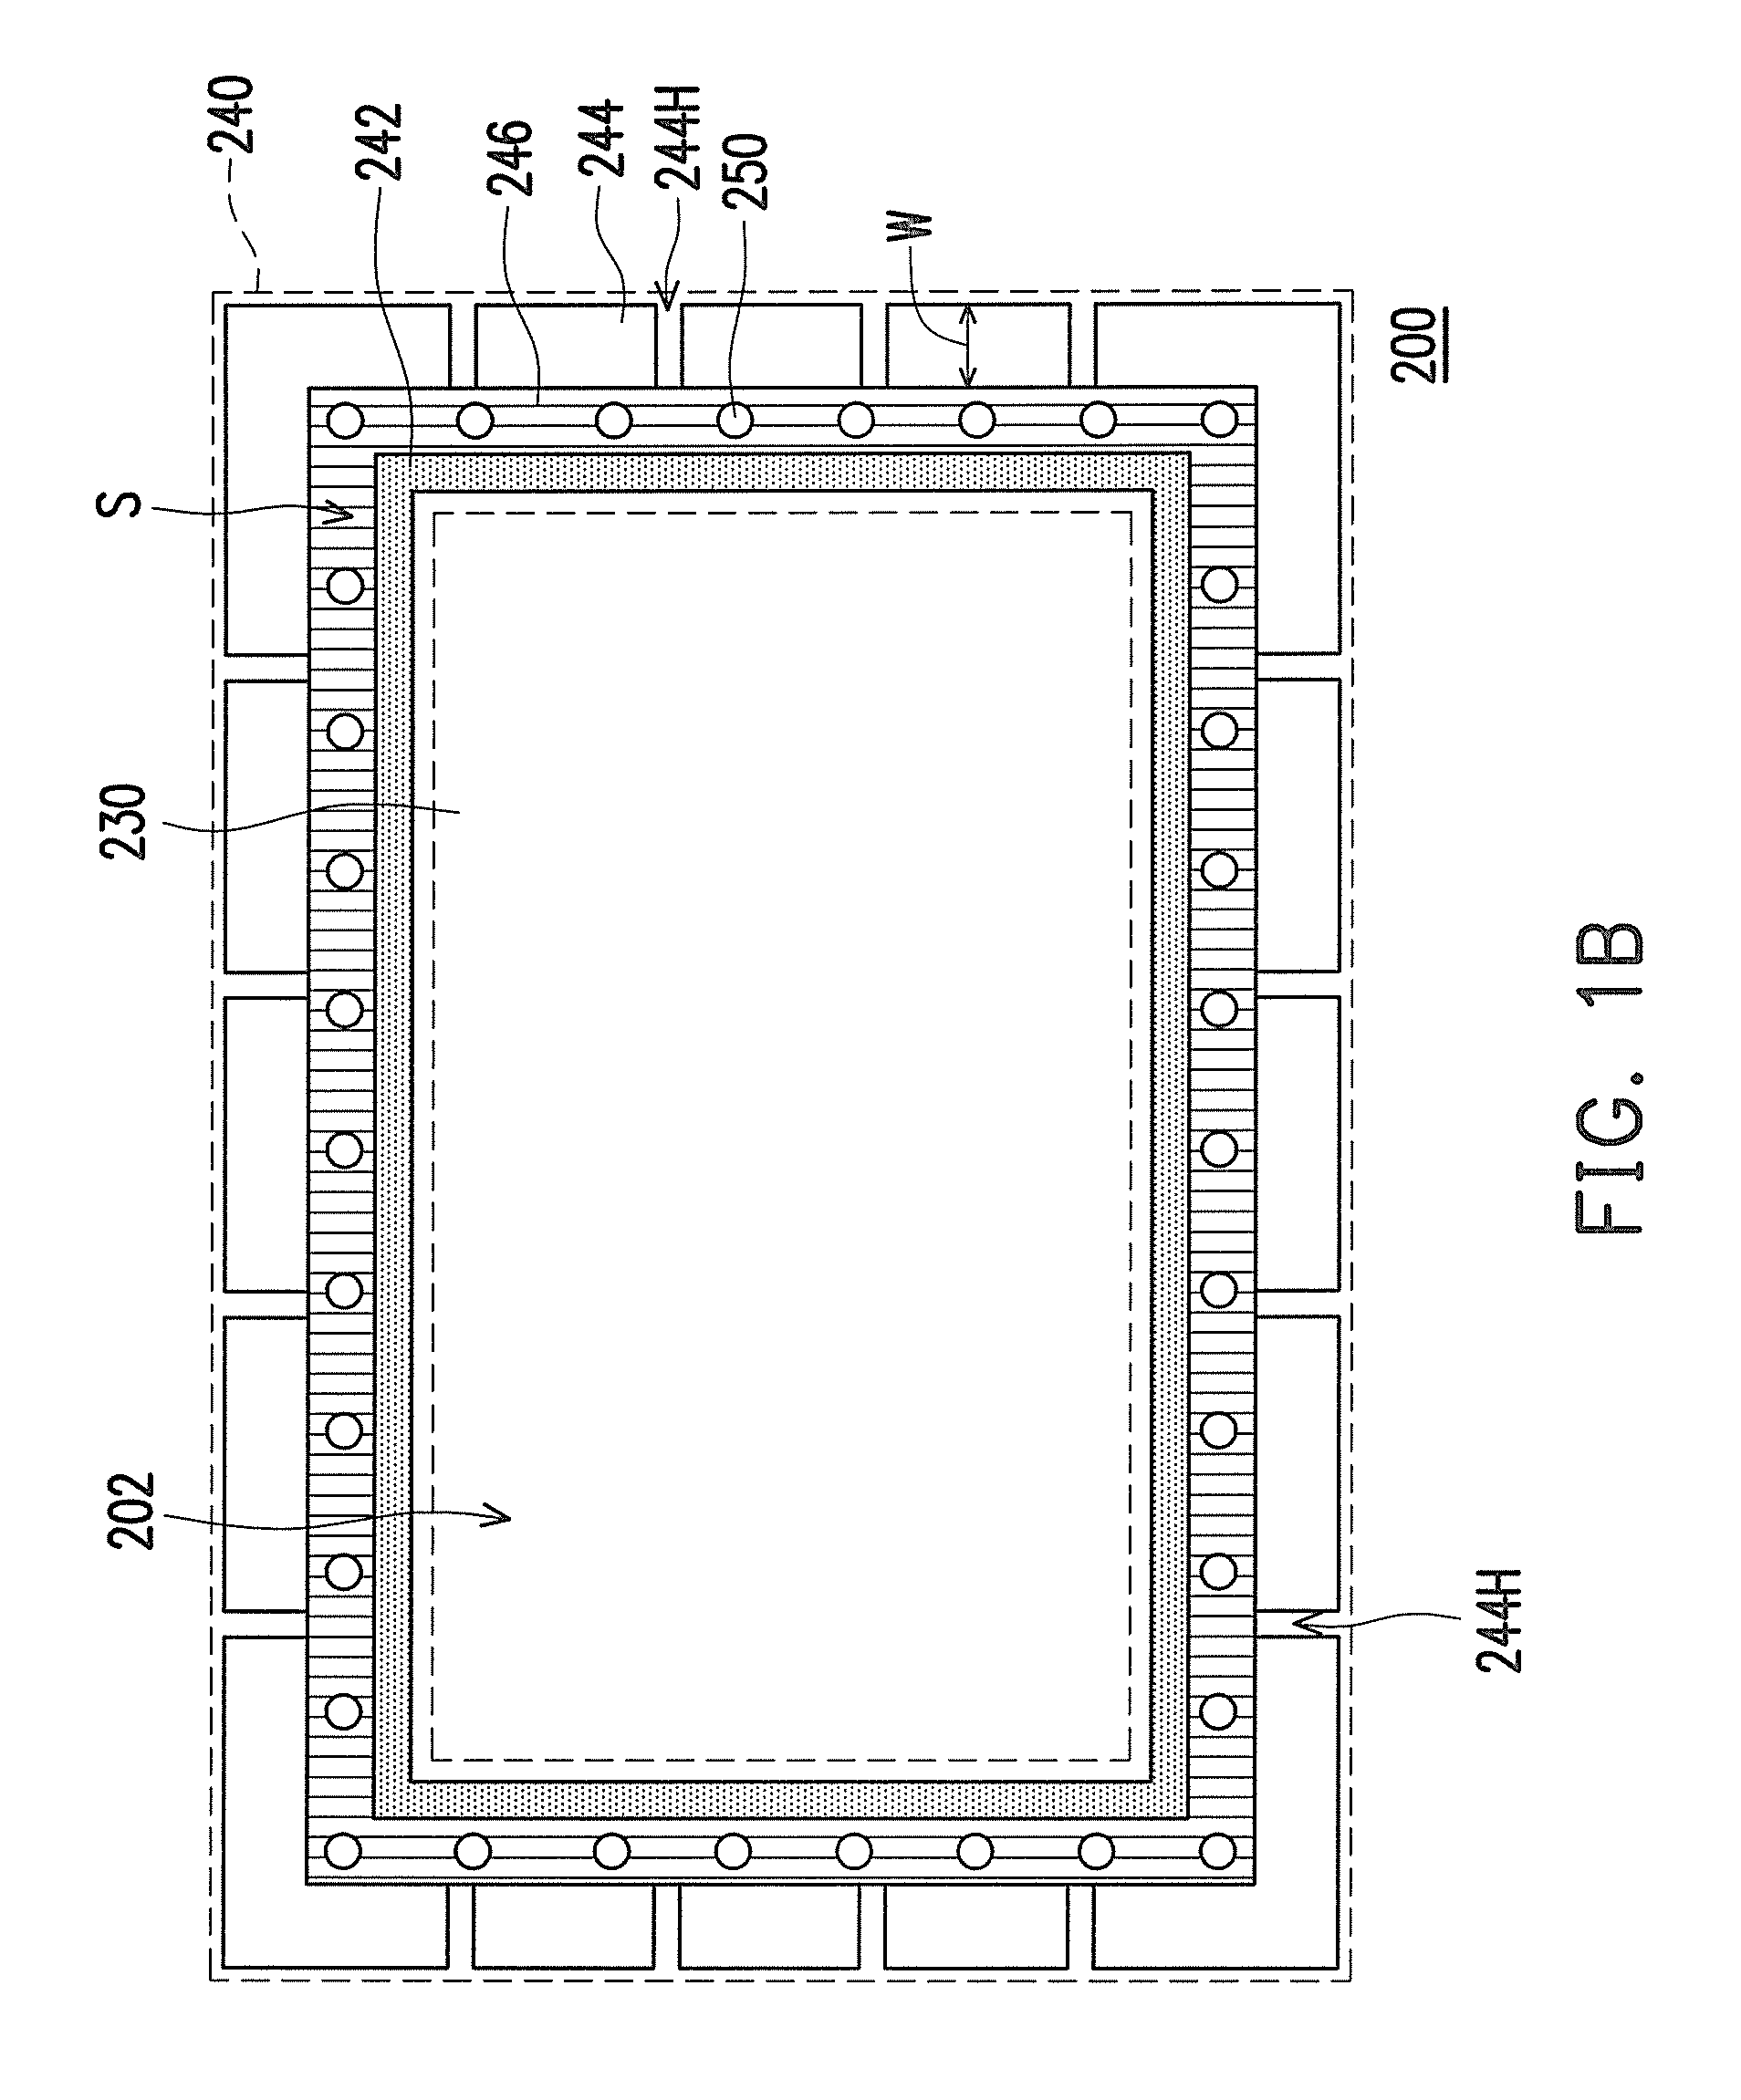 Display panel and sealing structure